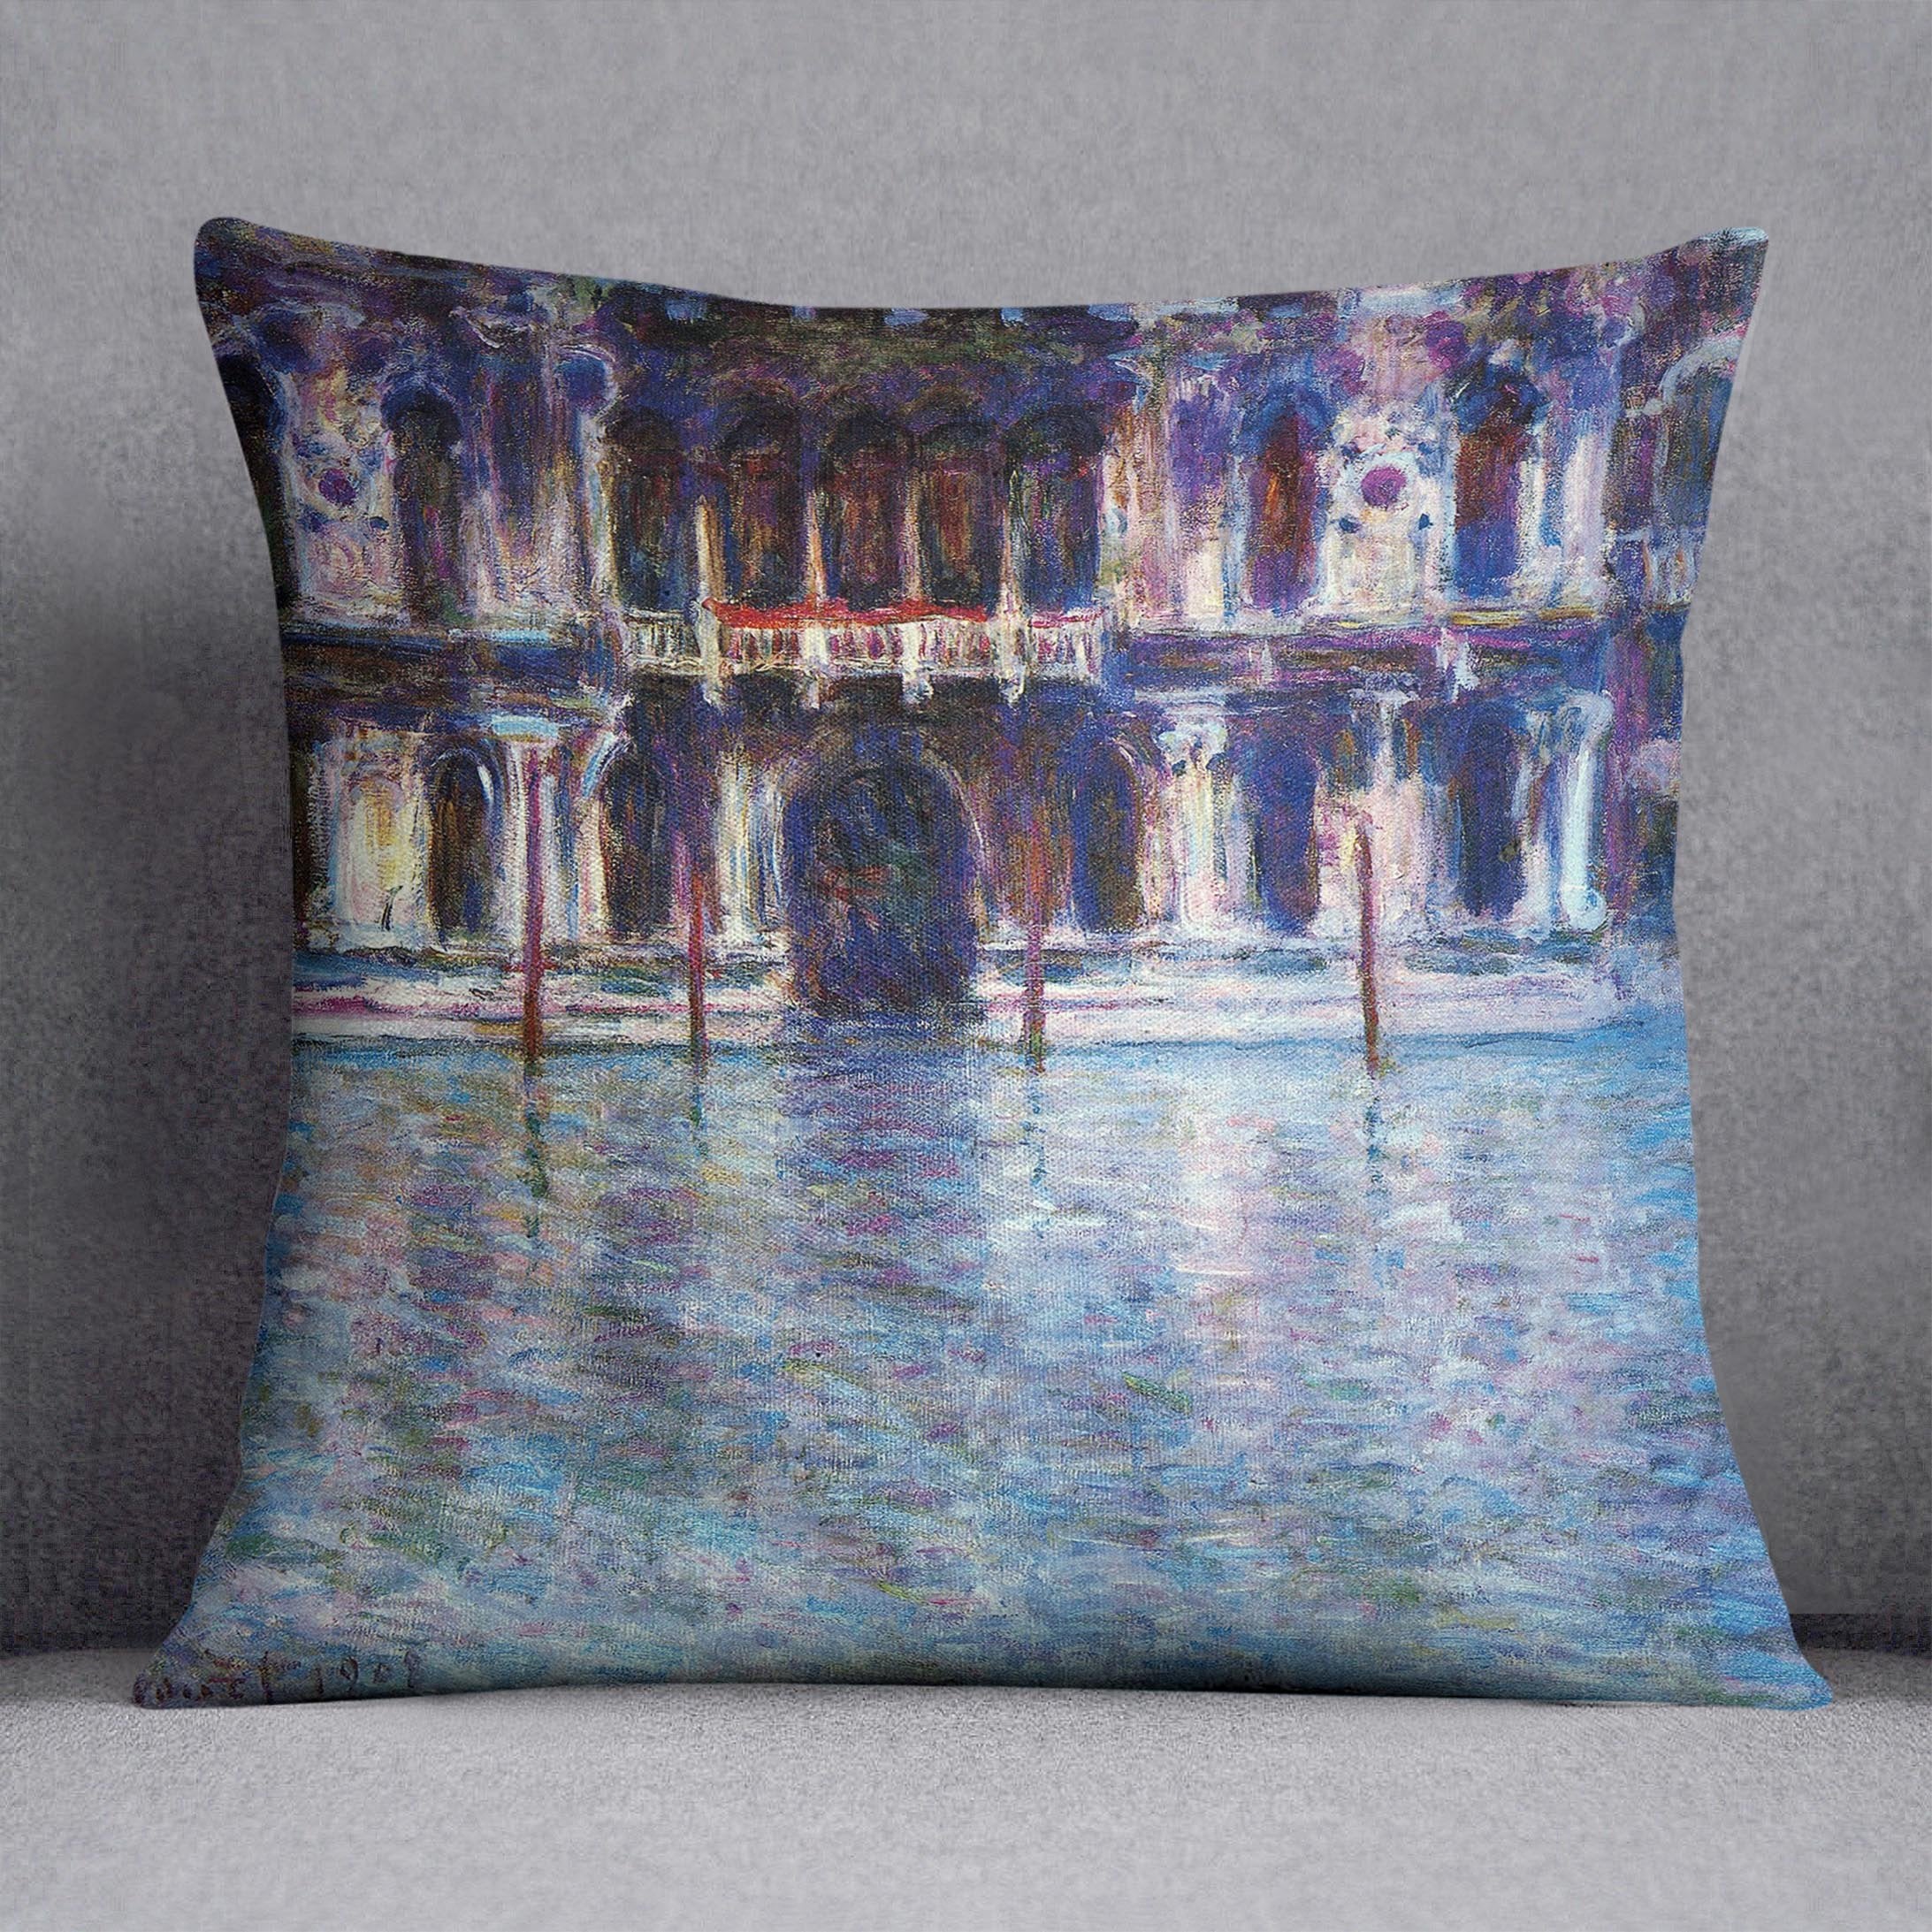 Palazzo 2 by Monet Throw Pillow